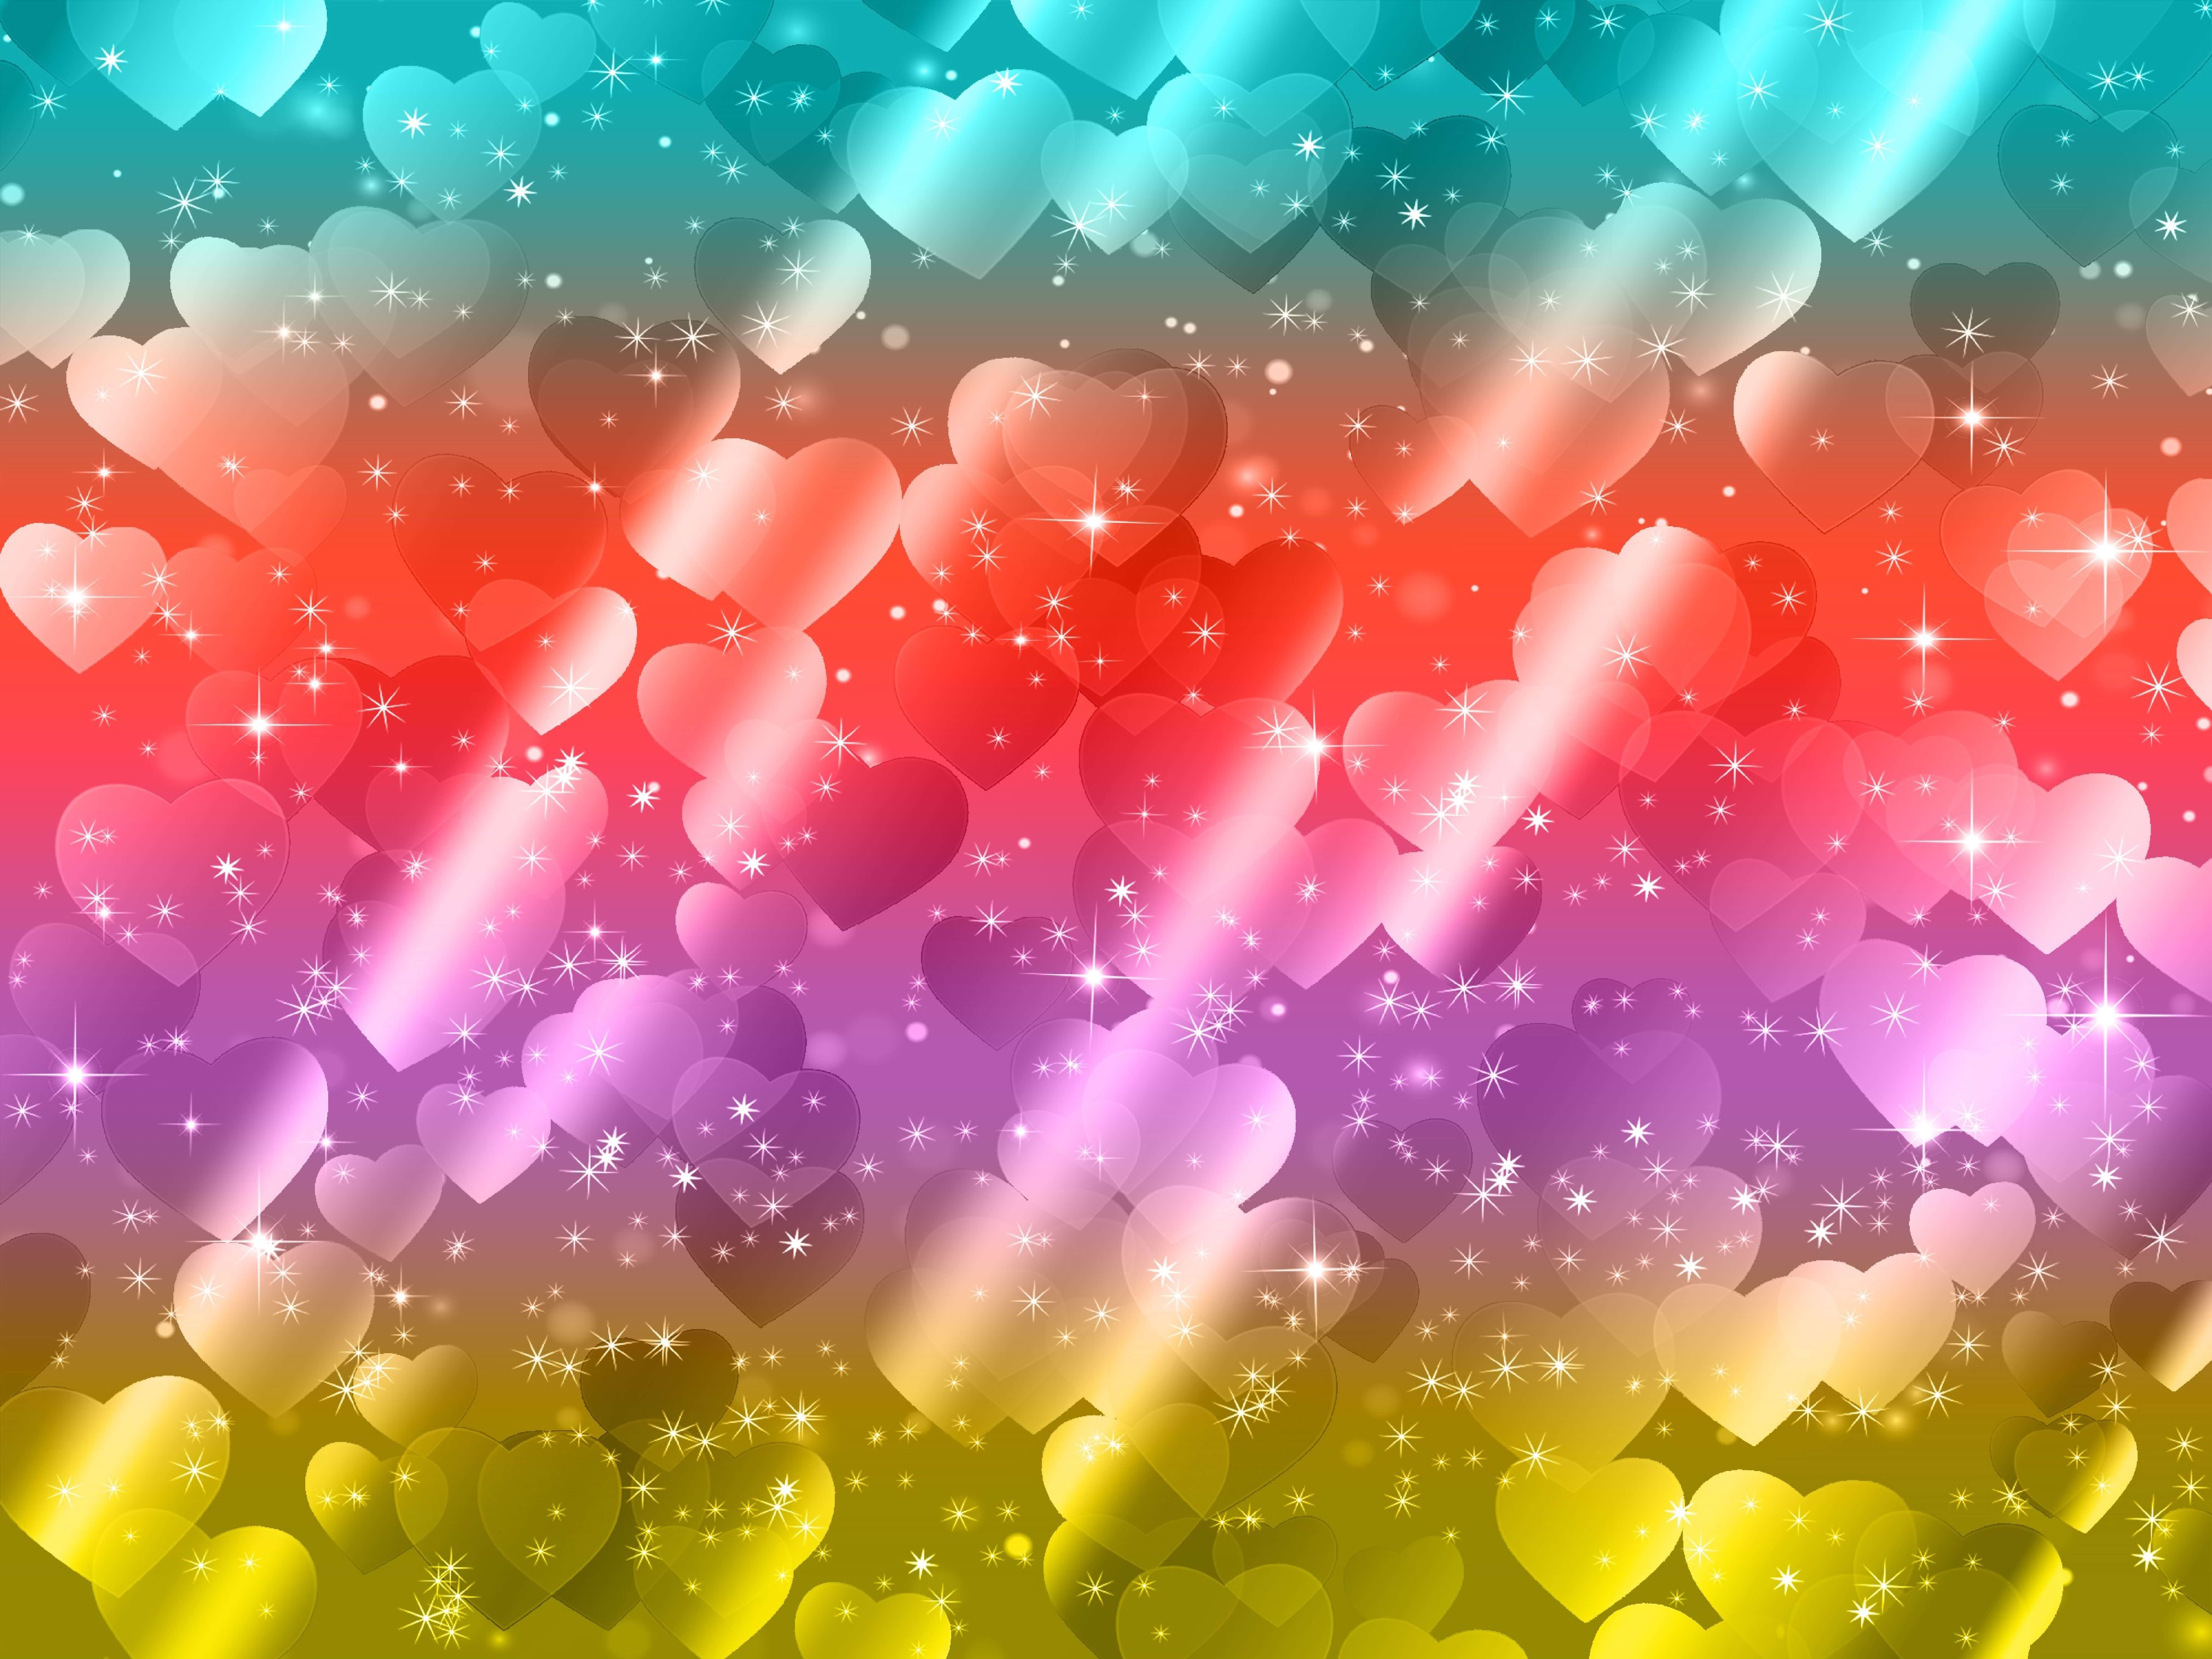 Colorful background with hearts and stars.